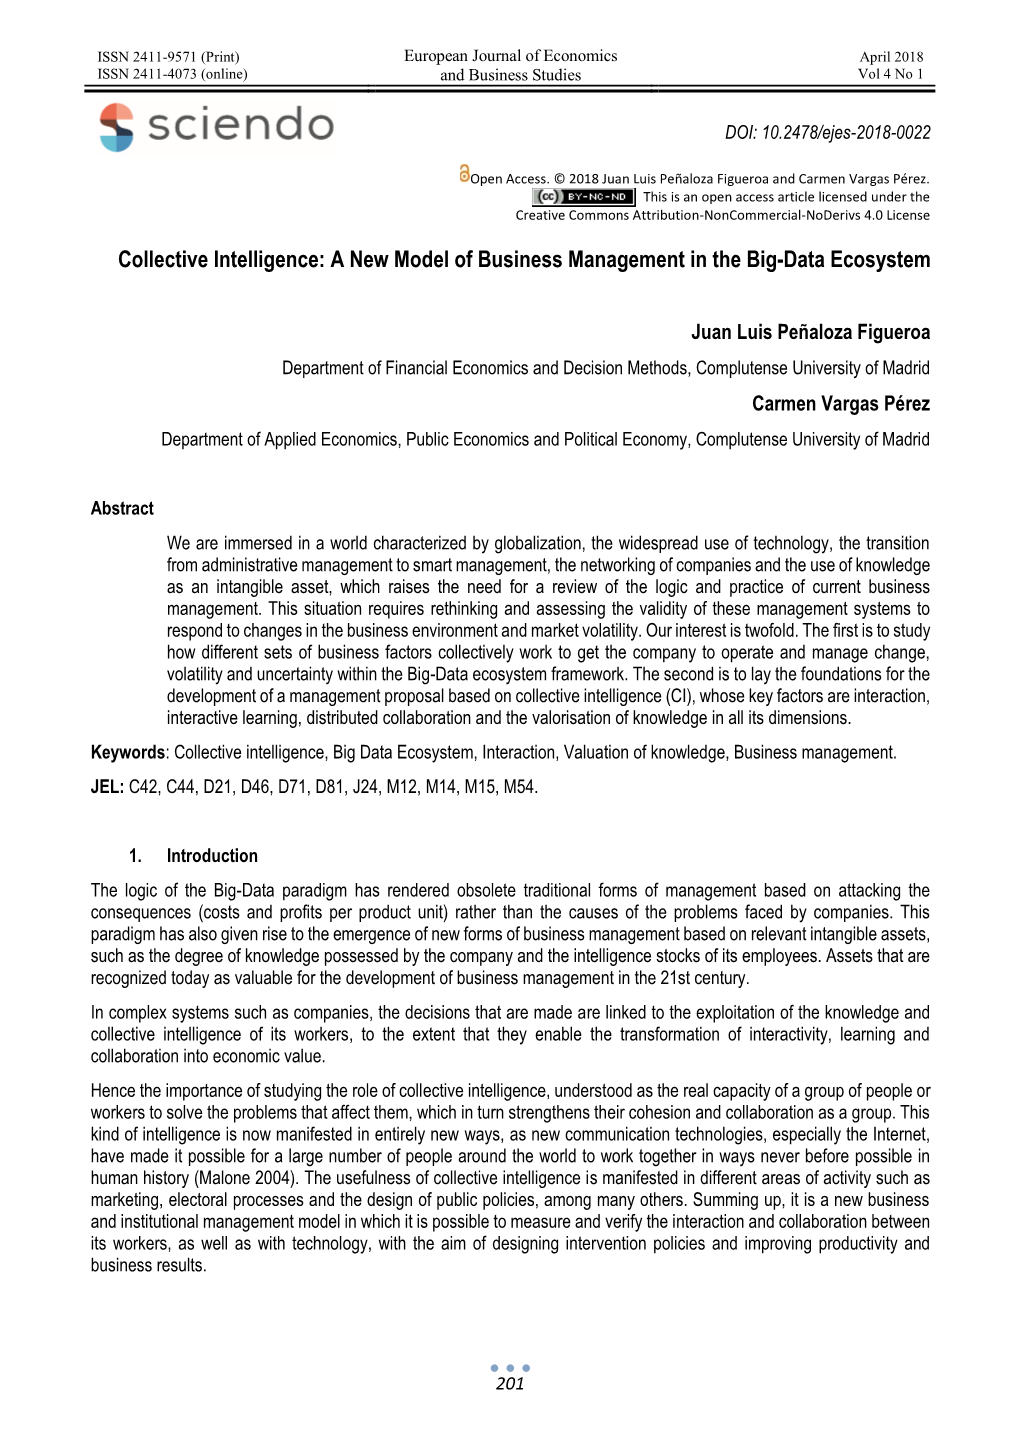 Collective Intelligence: a New Model of Business Management in the Big-Data Ecosystem